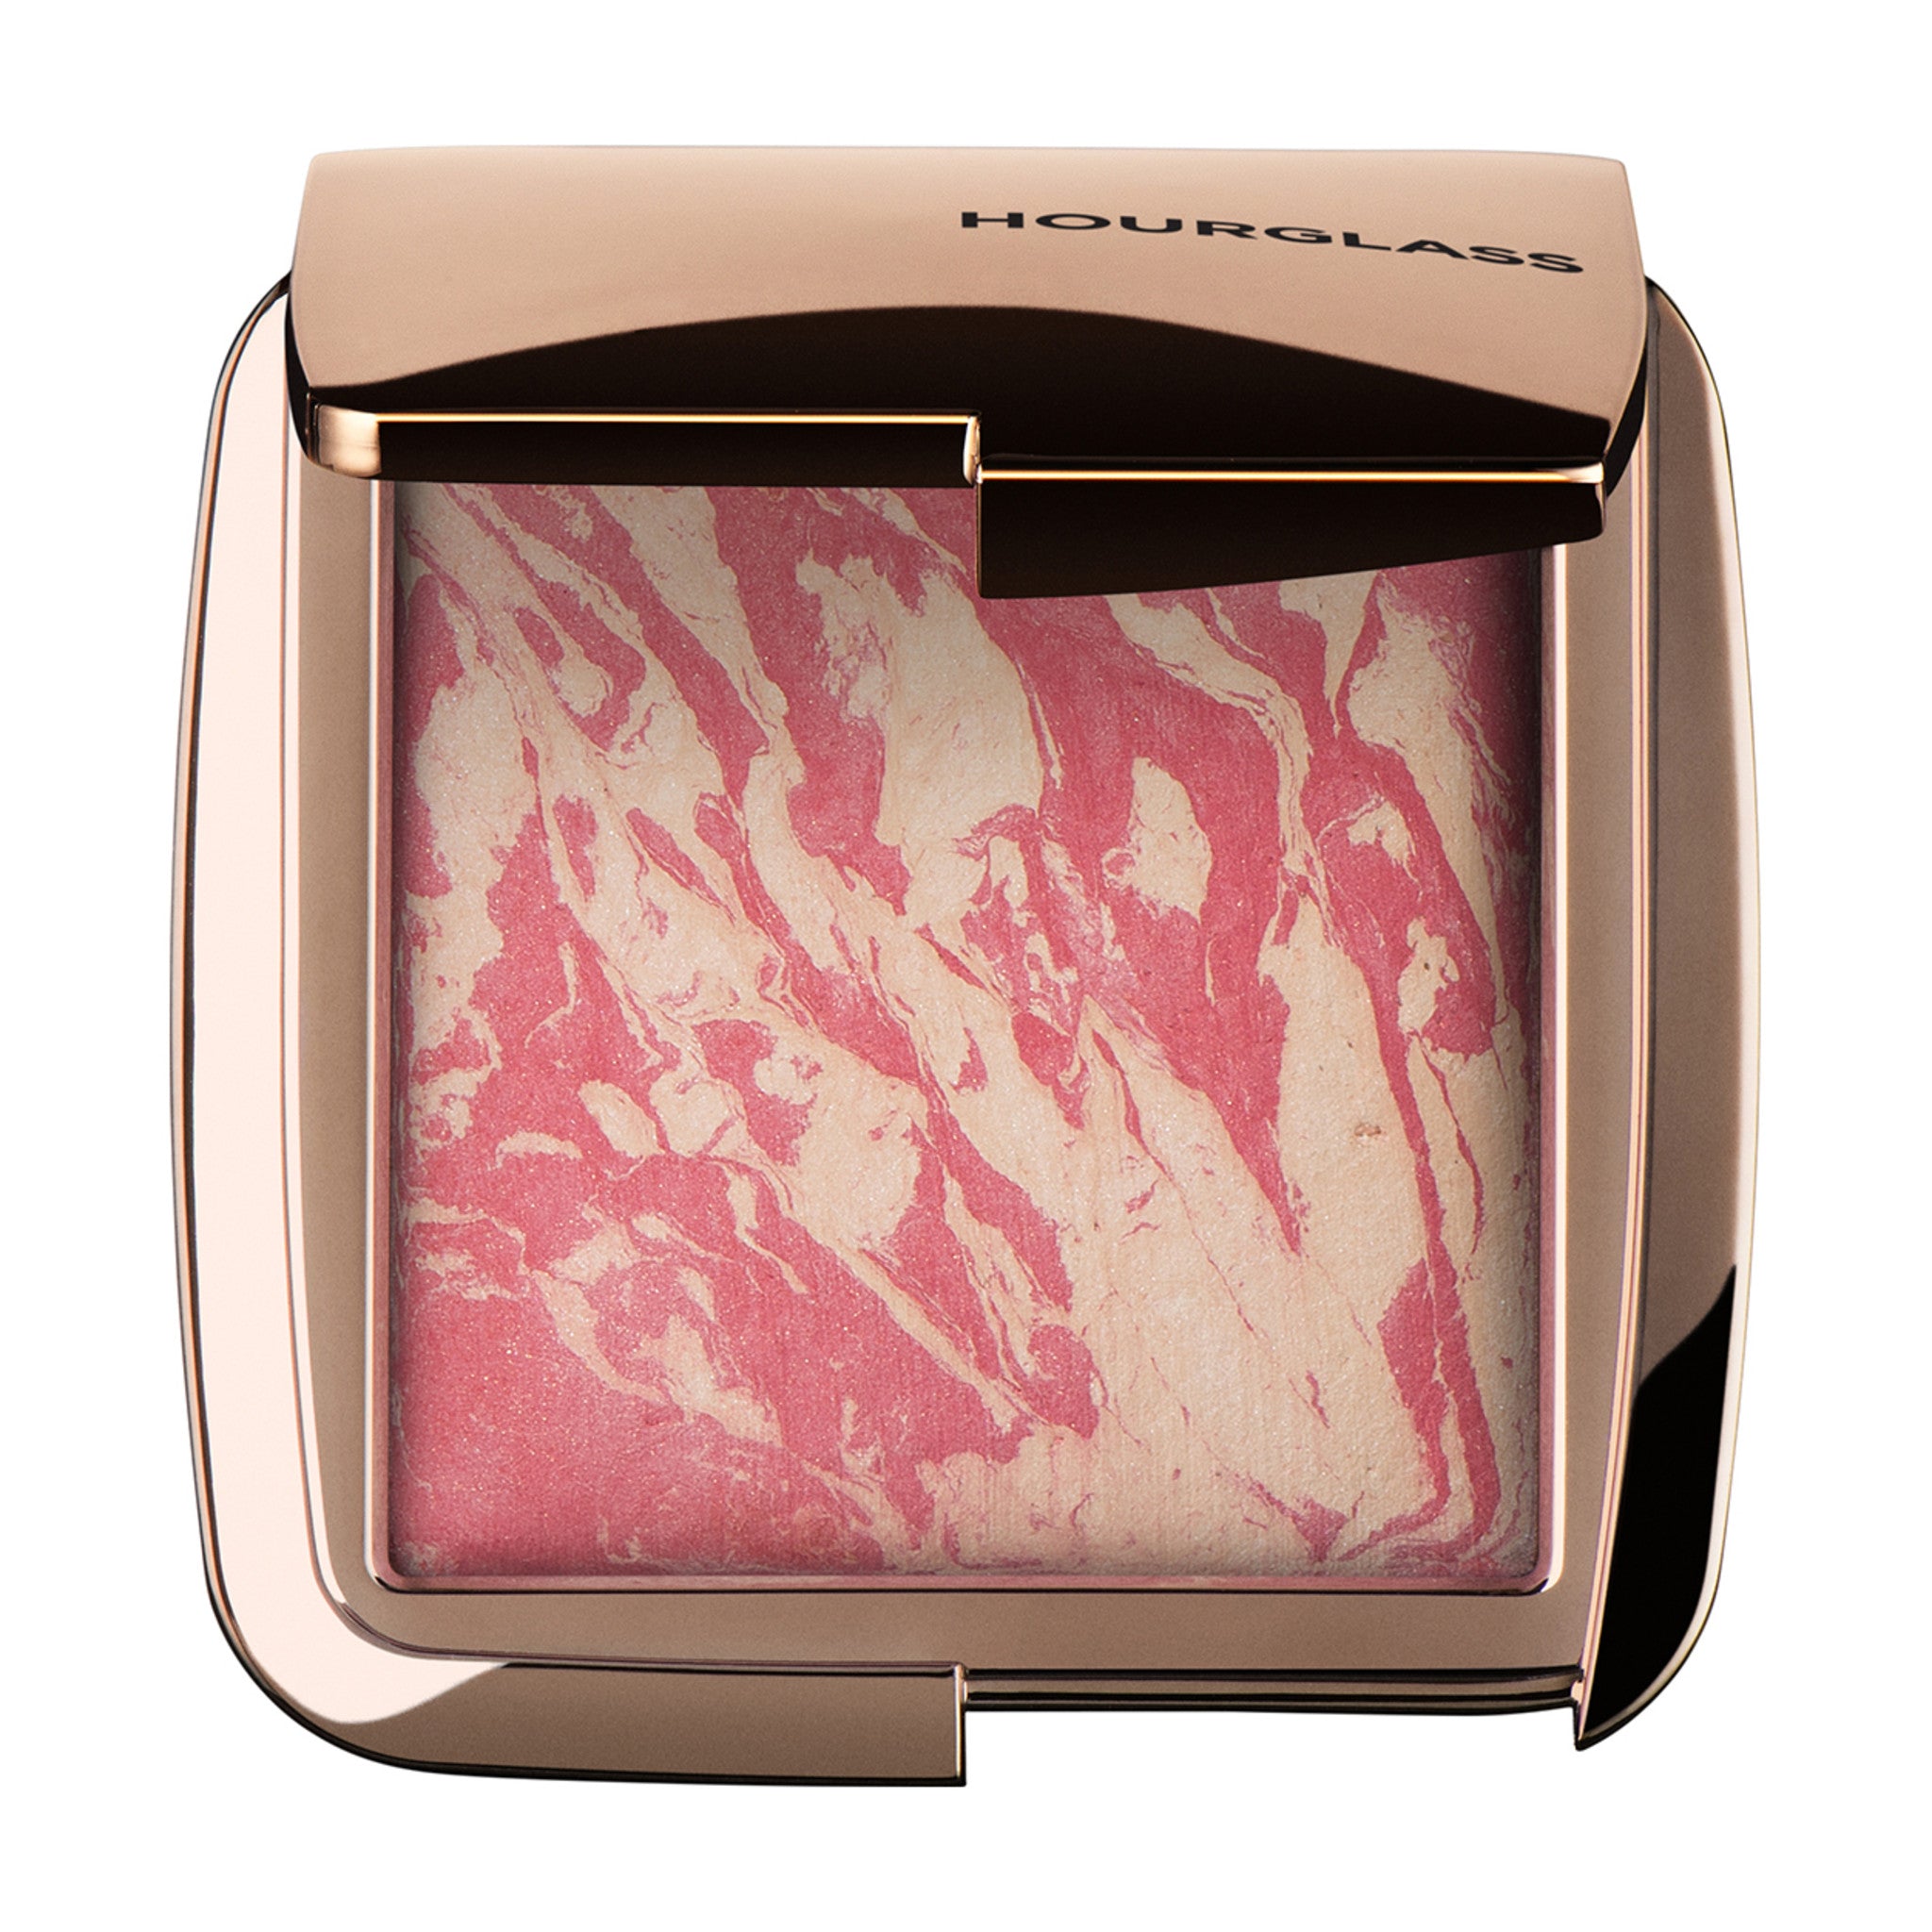 Hourglass Ambient Lighting Blush Color/Shade variant: Diffused Heat main image. This product is in the color coral